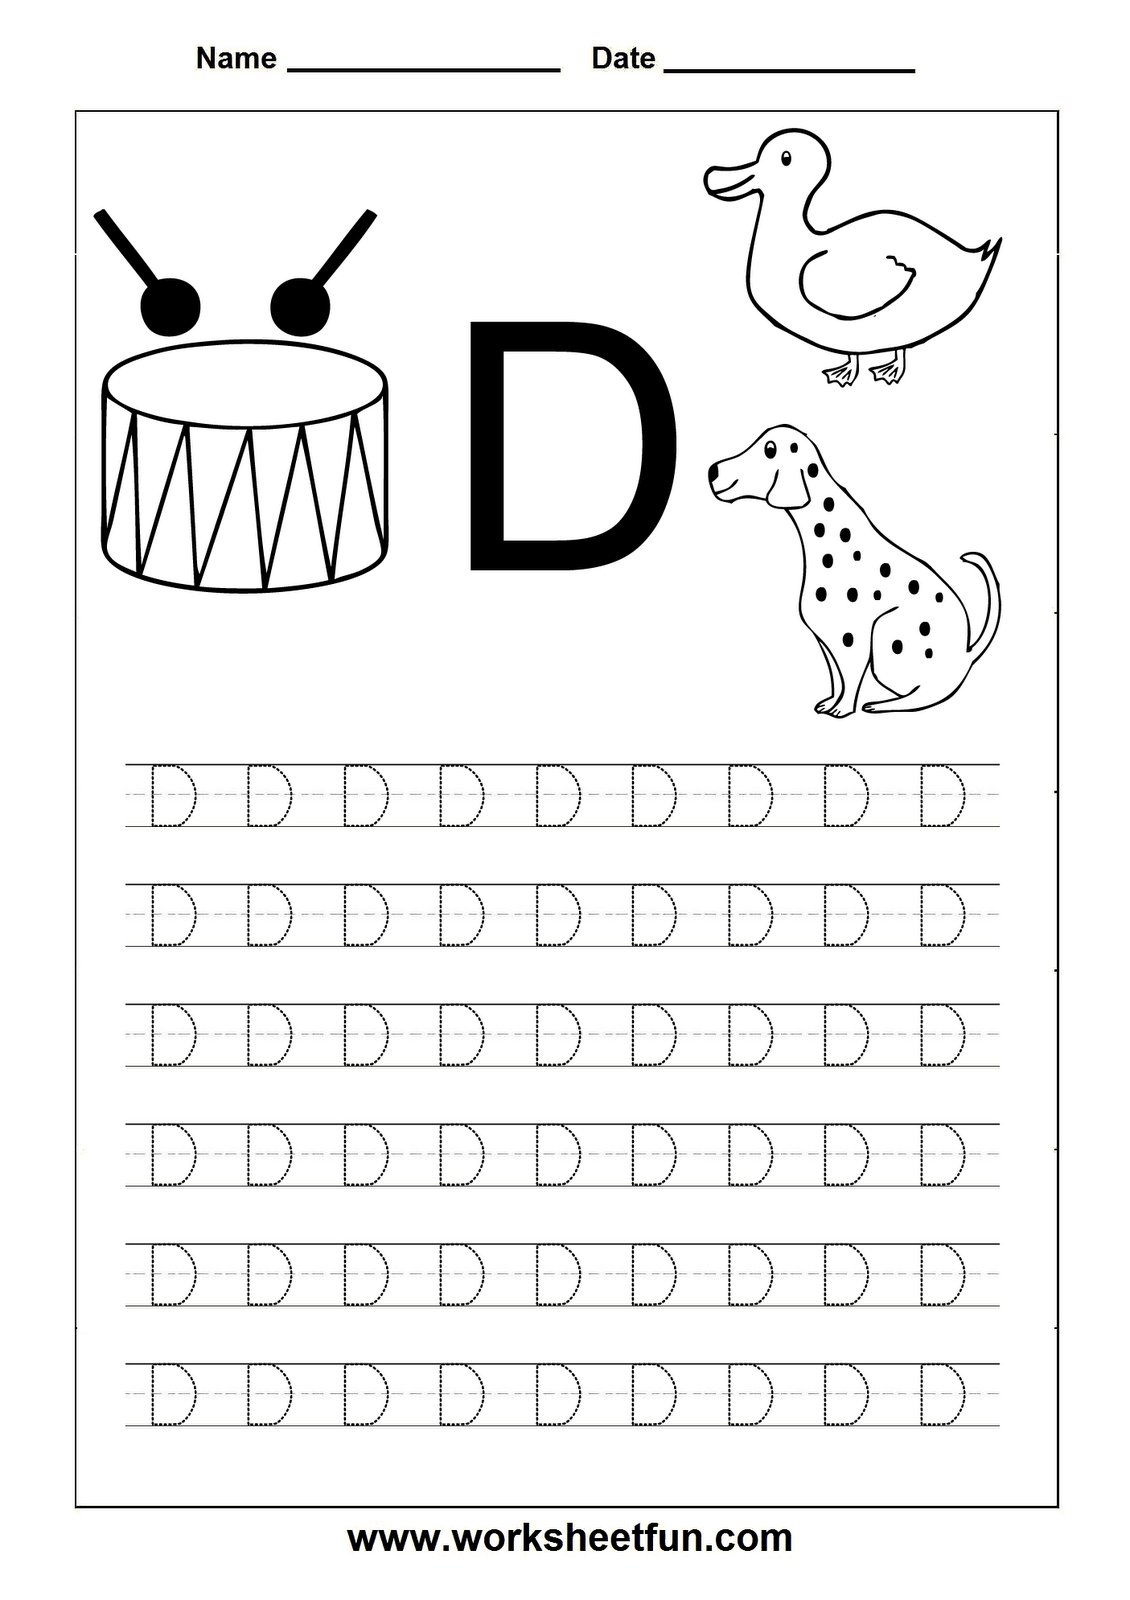 Letter D Worksheets Hd Wallpapers Download Free Letter D with D Letter Tracing